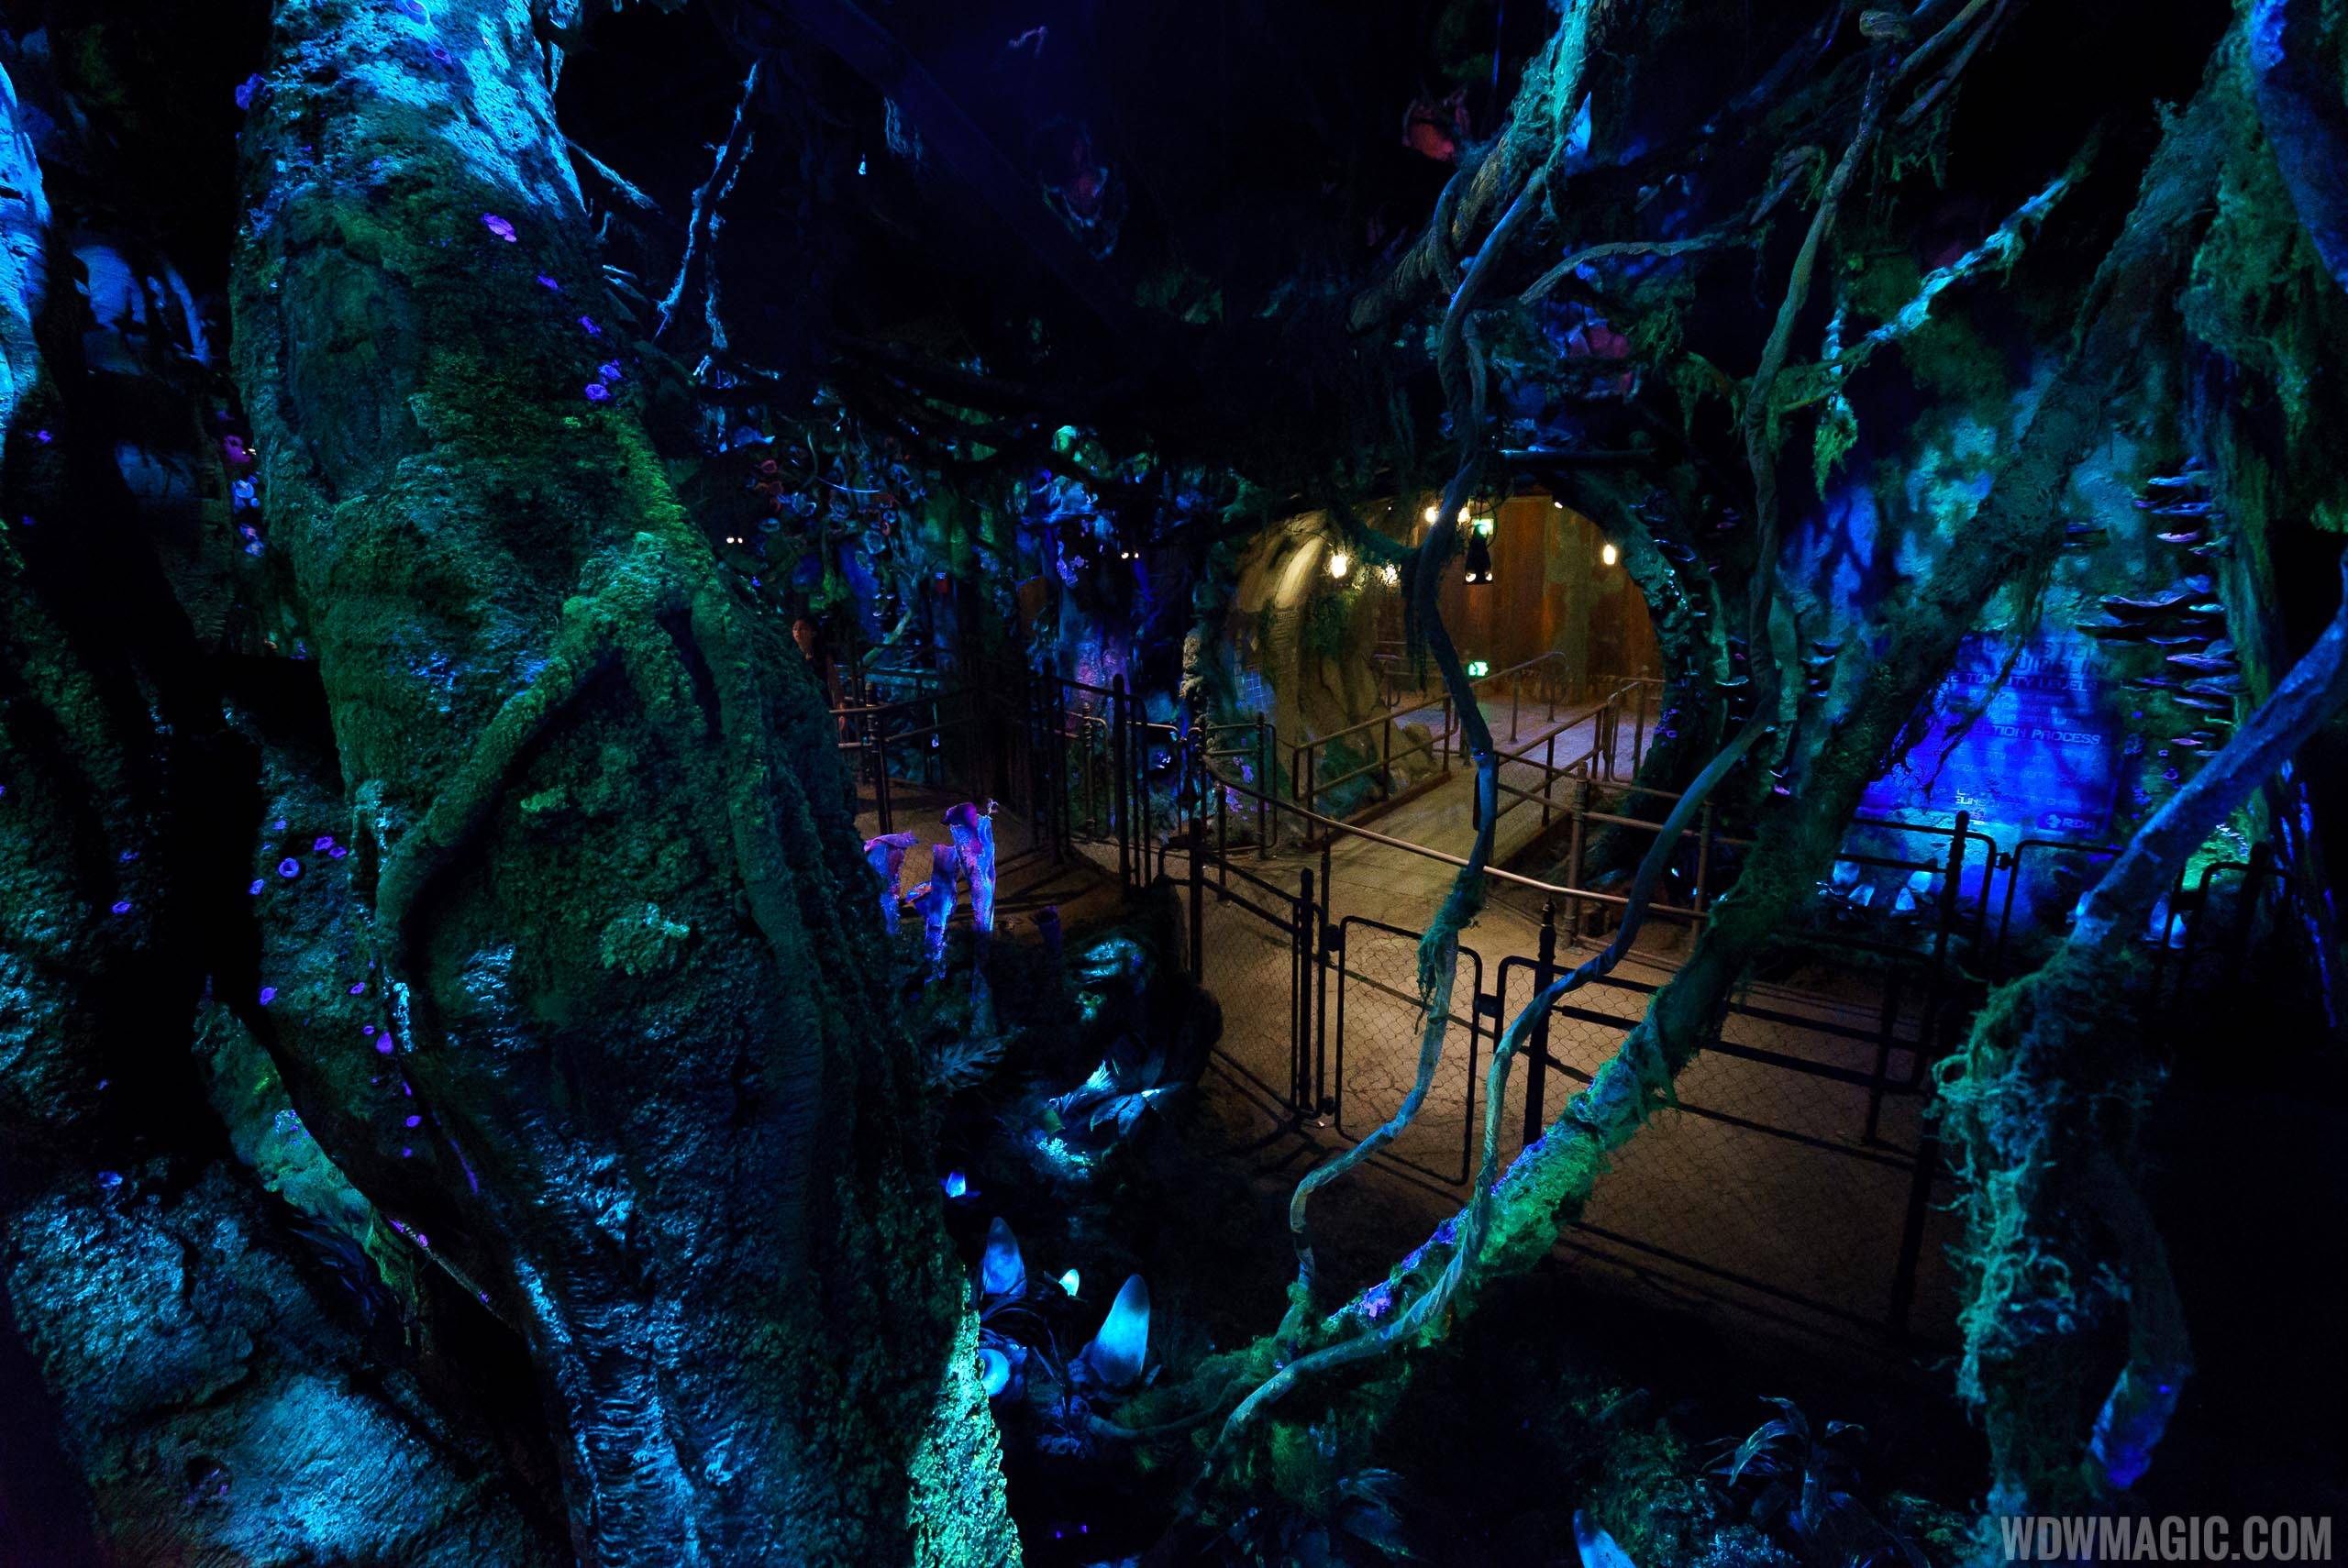 Avatar Flight of Passage queue - Looking down to the queue space